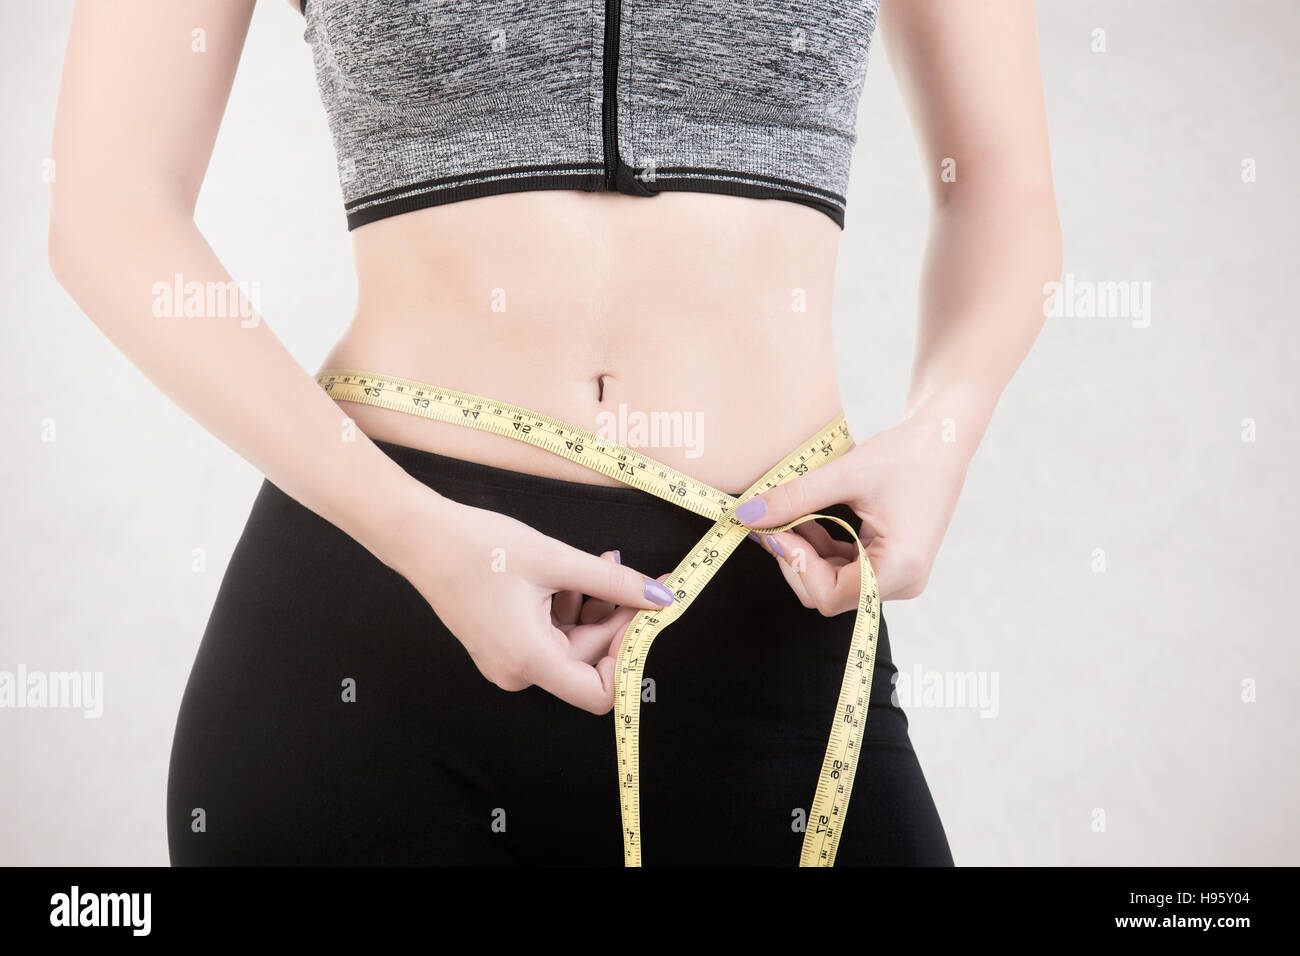 Woman measuring her waist with a yellow measuring tape, isolated Stock Photo